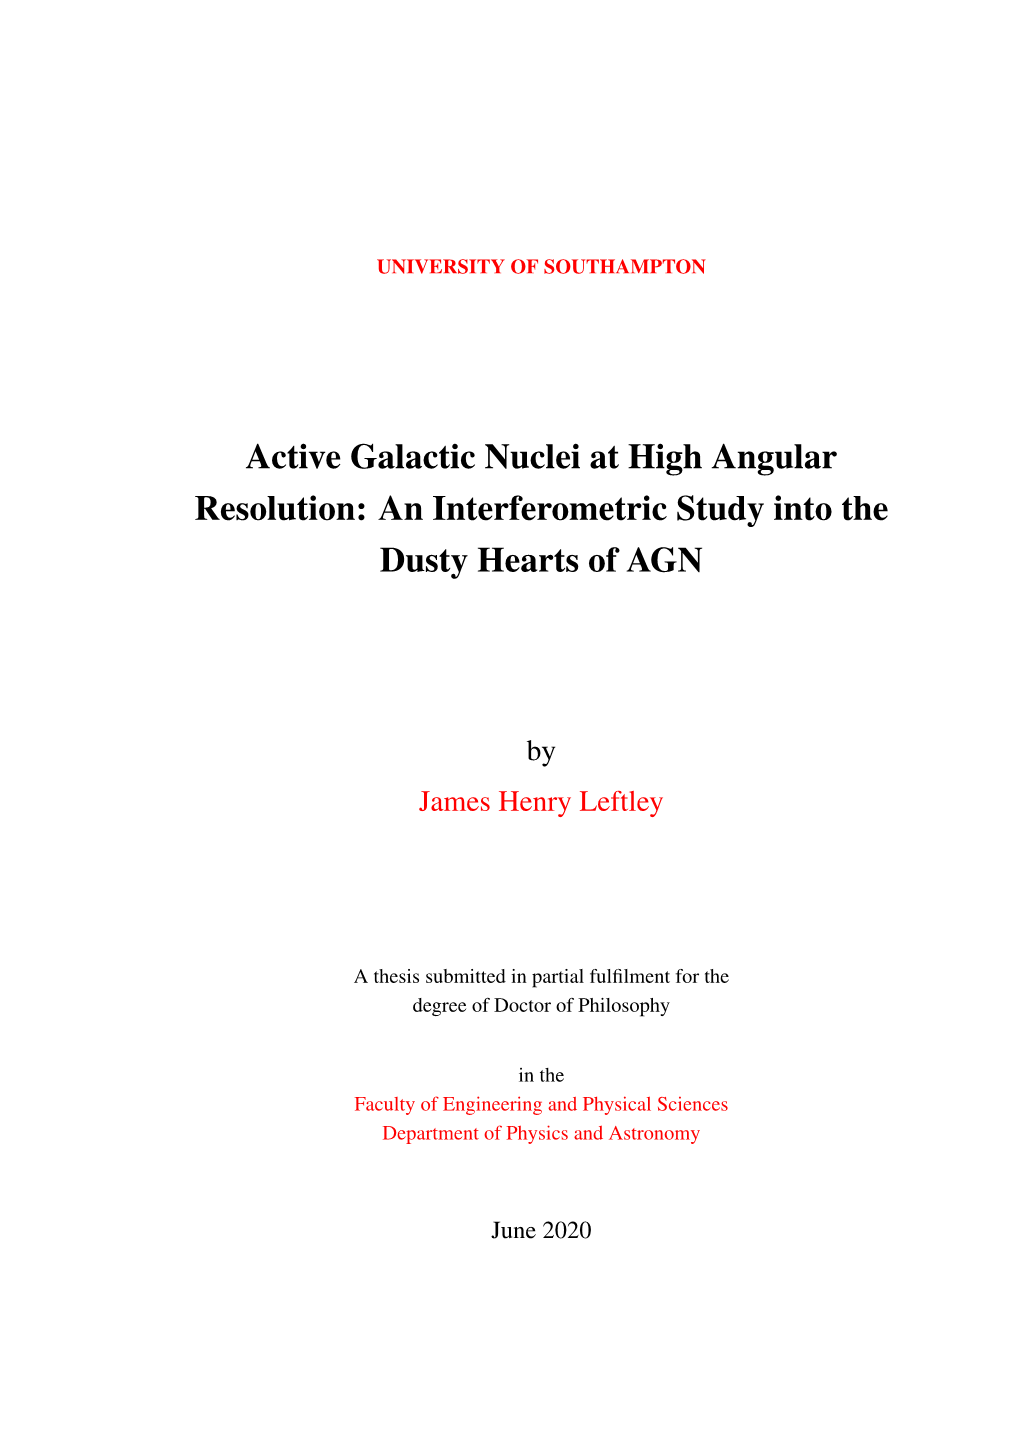 An Interferometric Study Into the Dusty Hearts of AGN